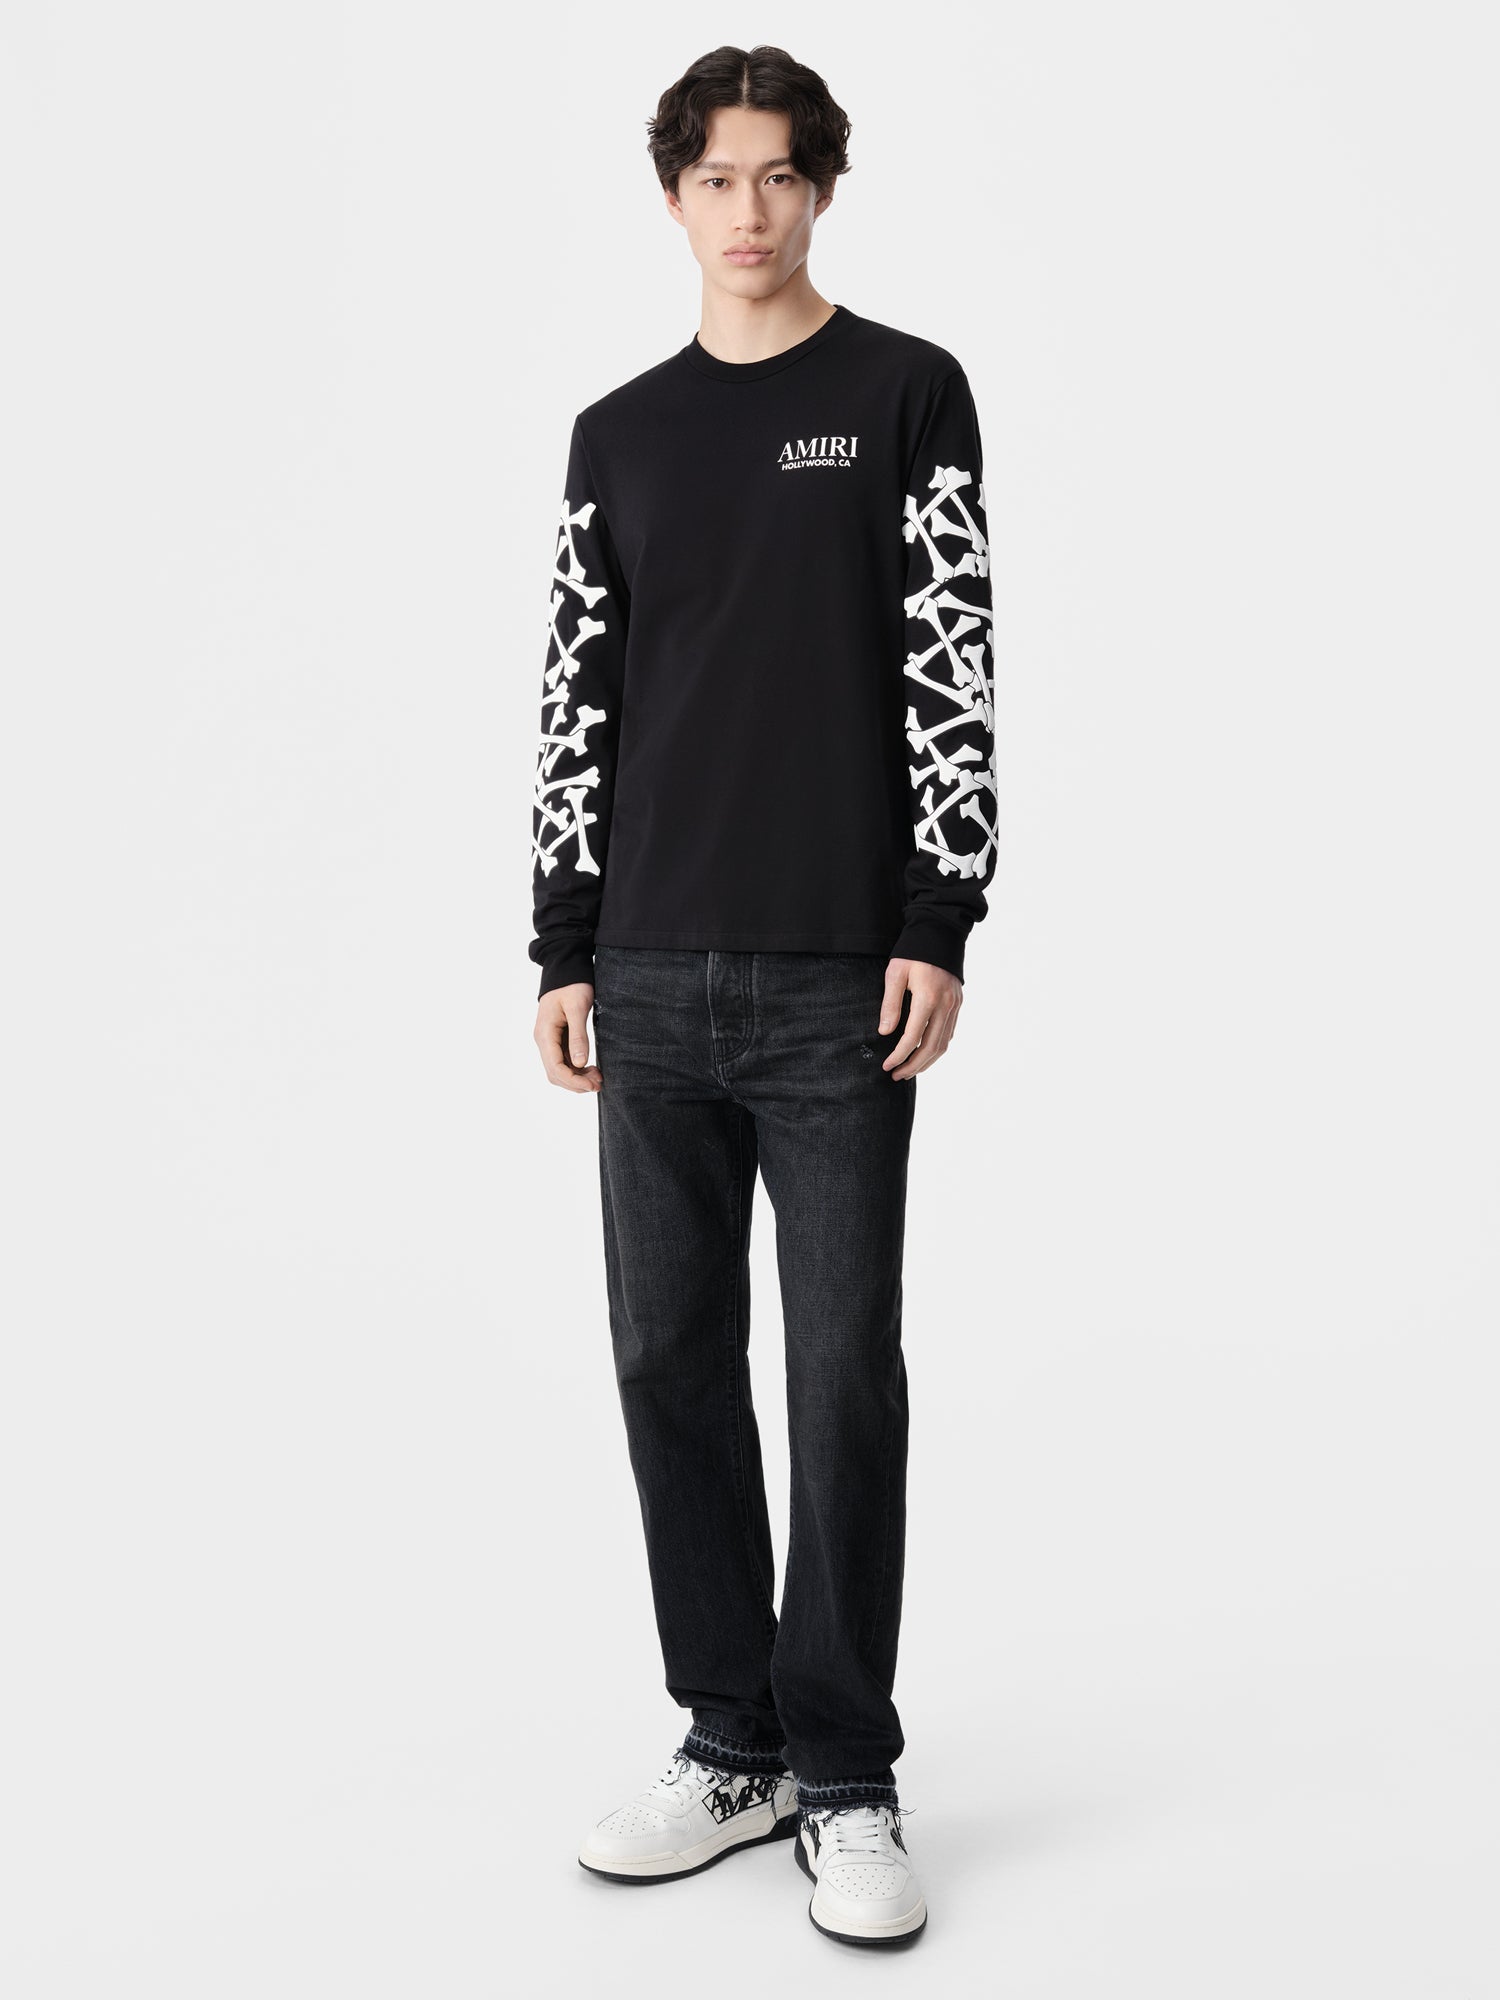 Product BONES STACKED LONG SLEEVE TEE - Black featured image